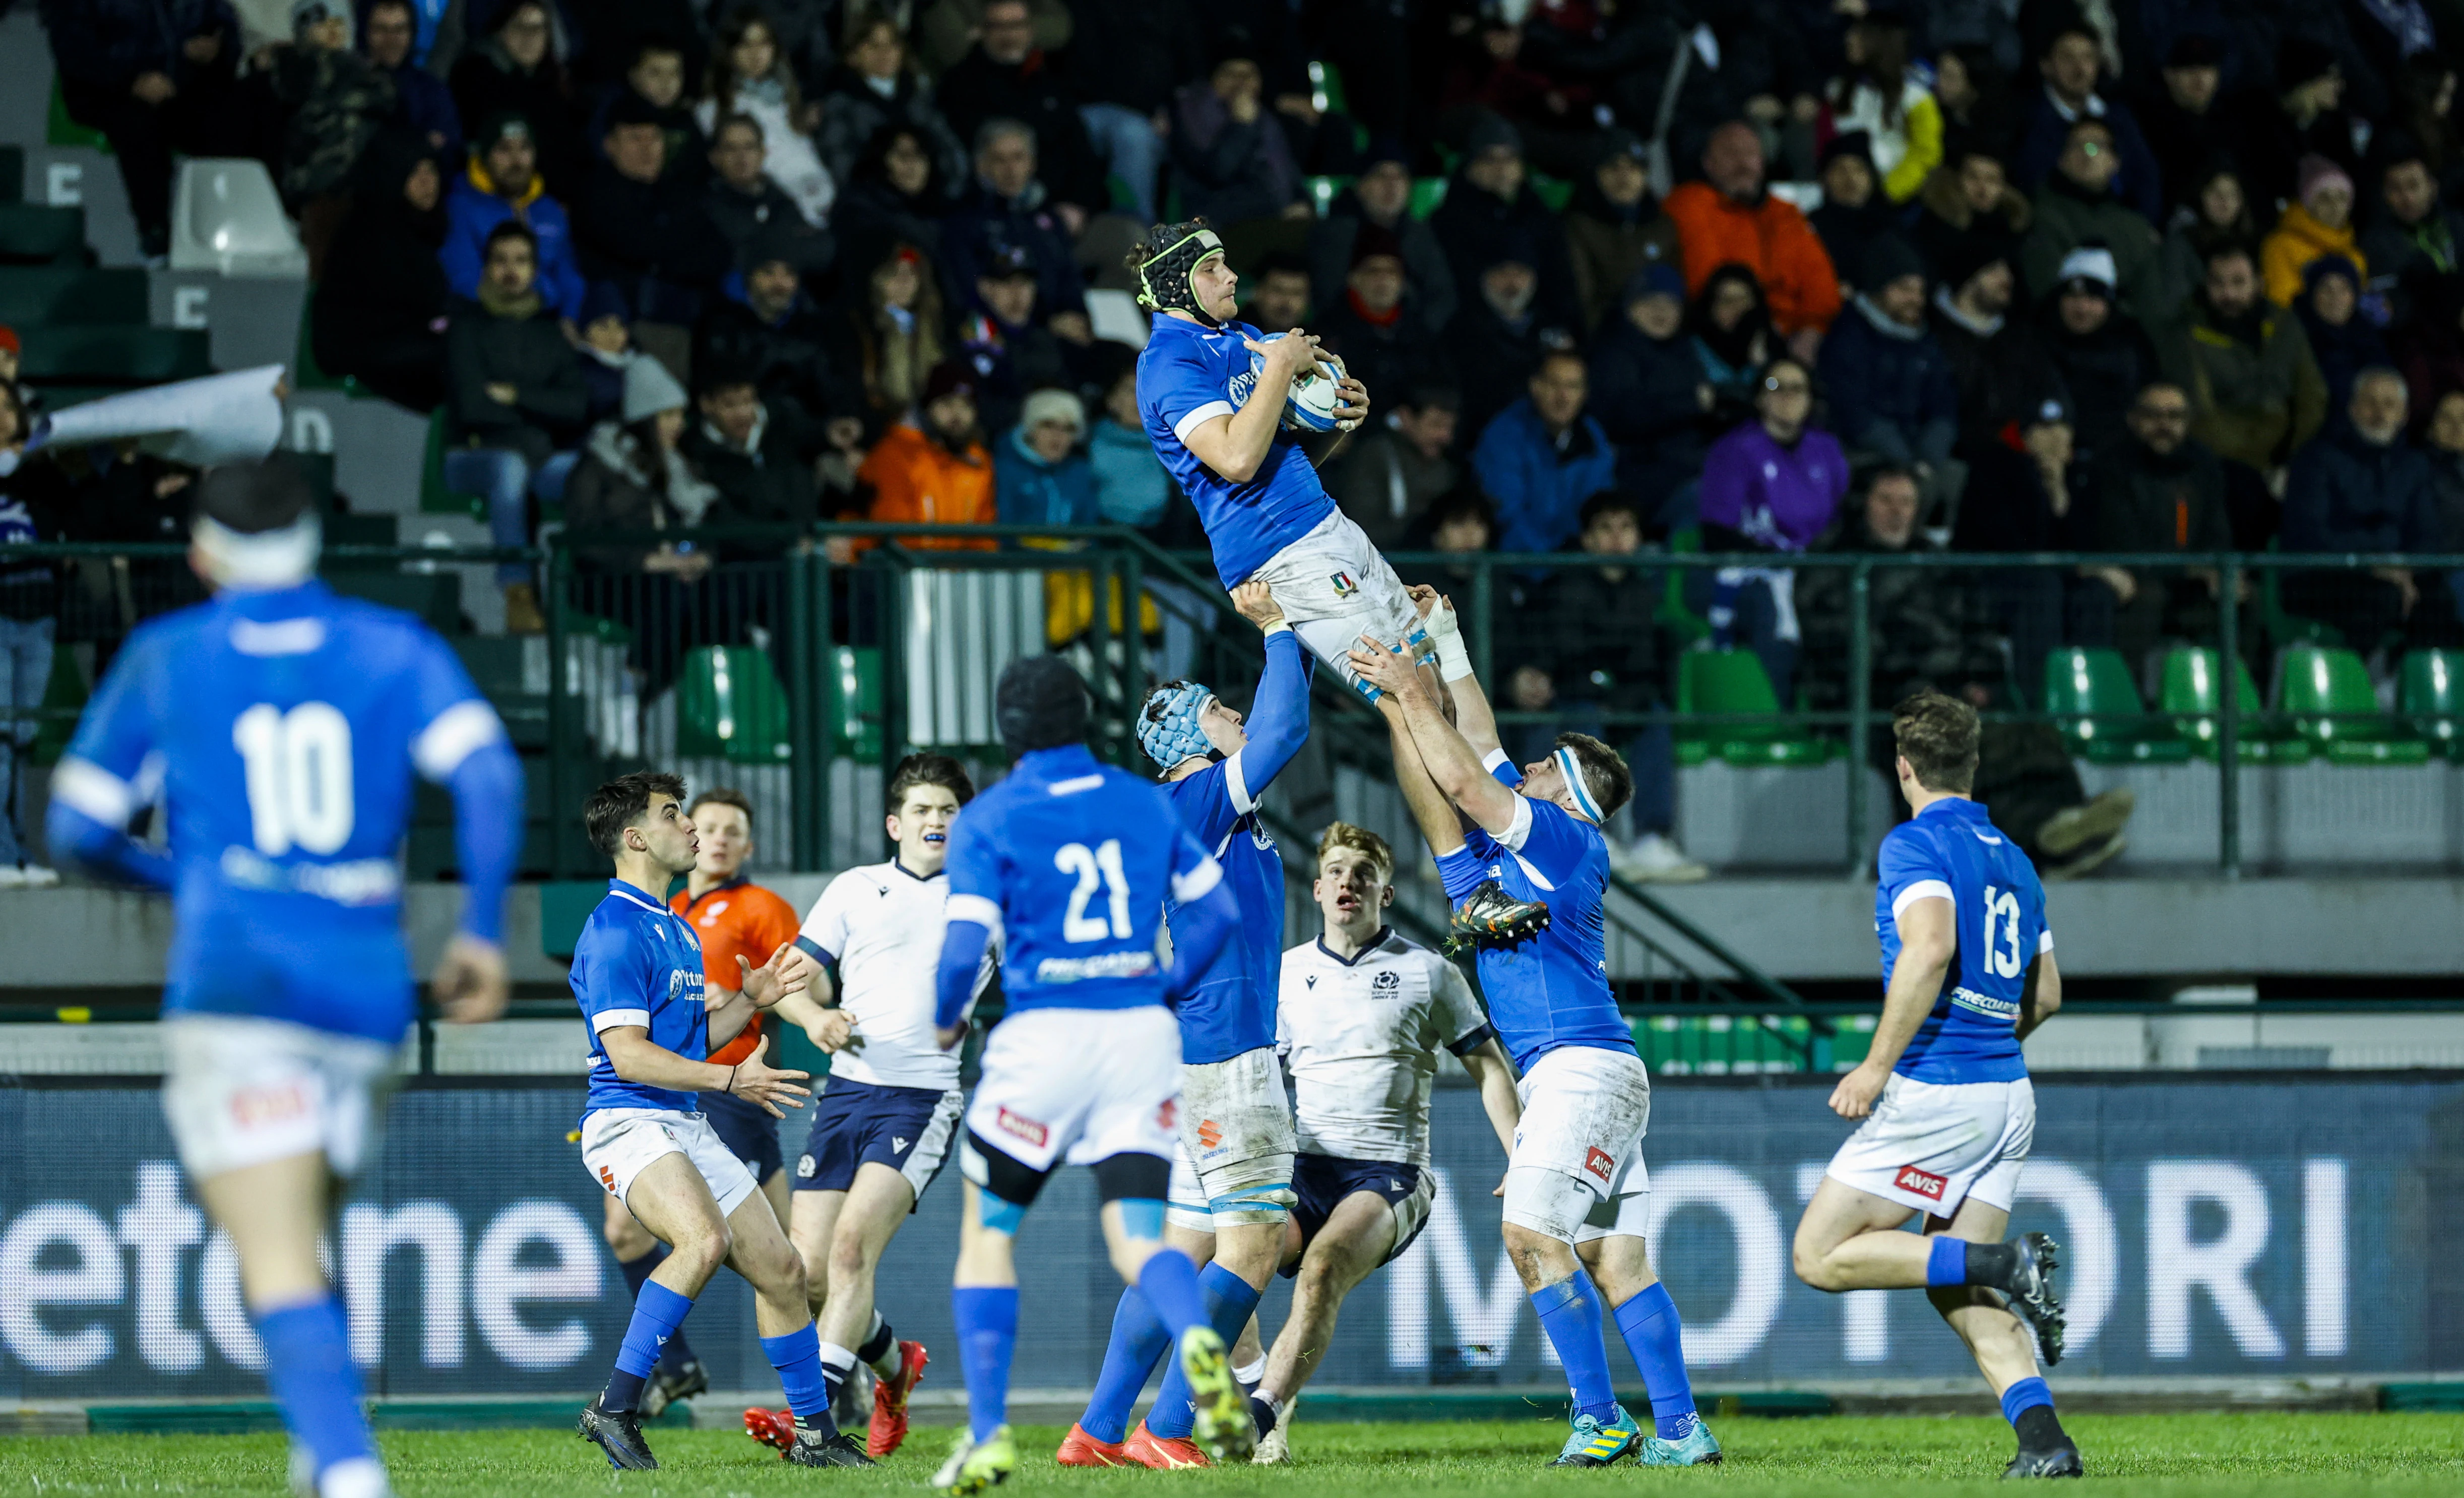 Italy U20 lineout